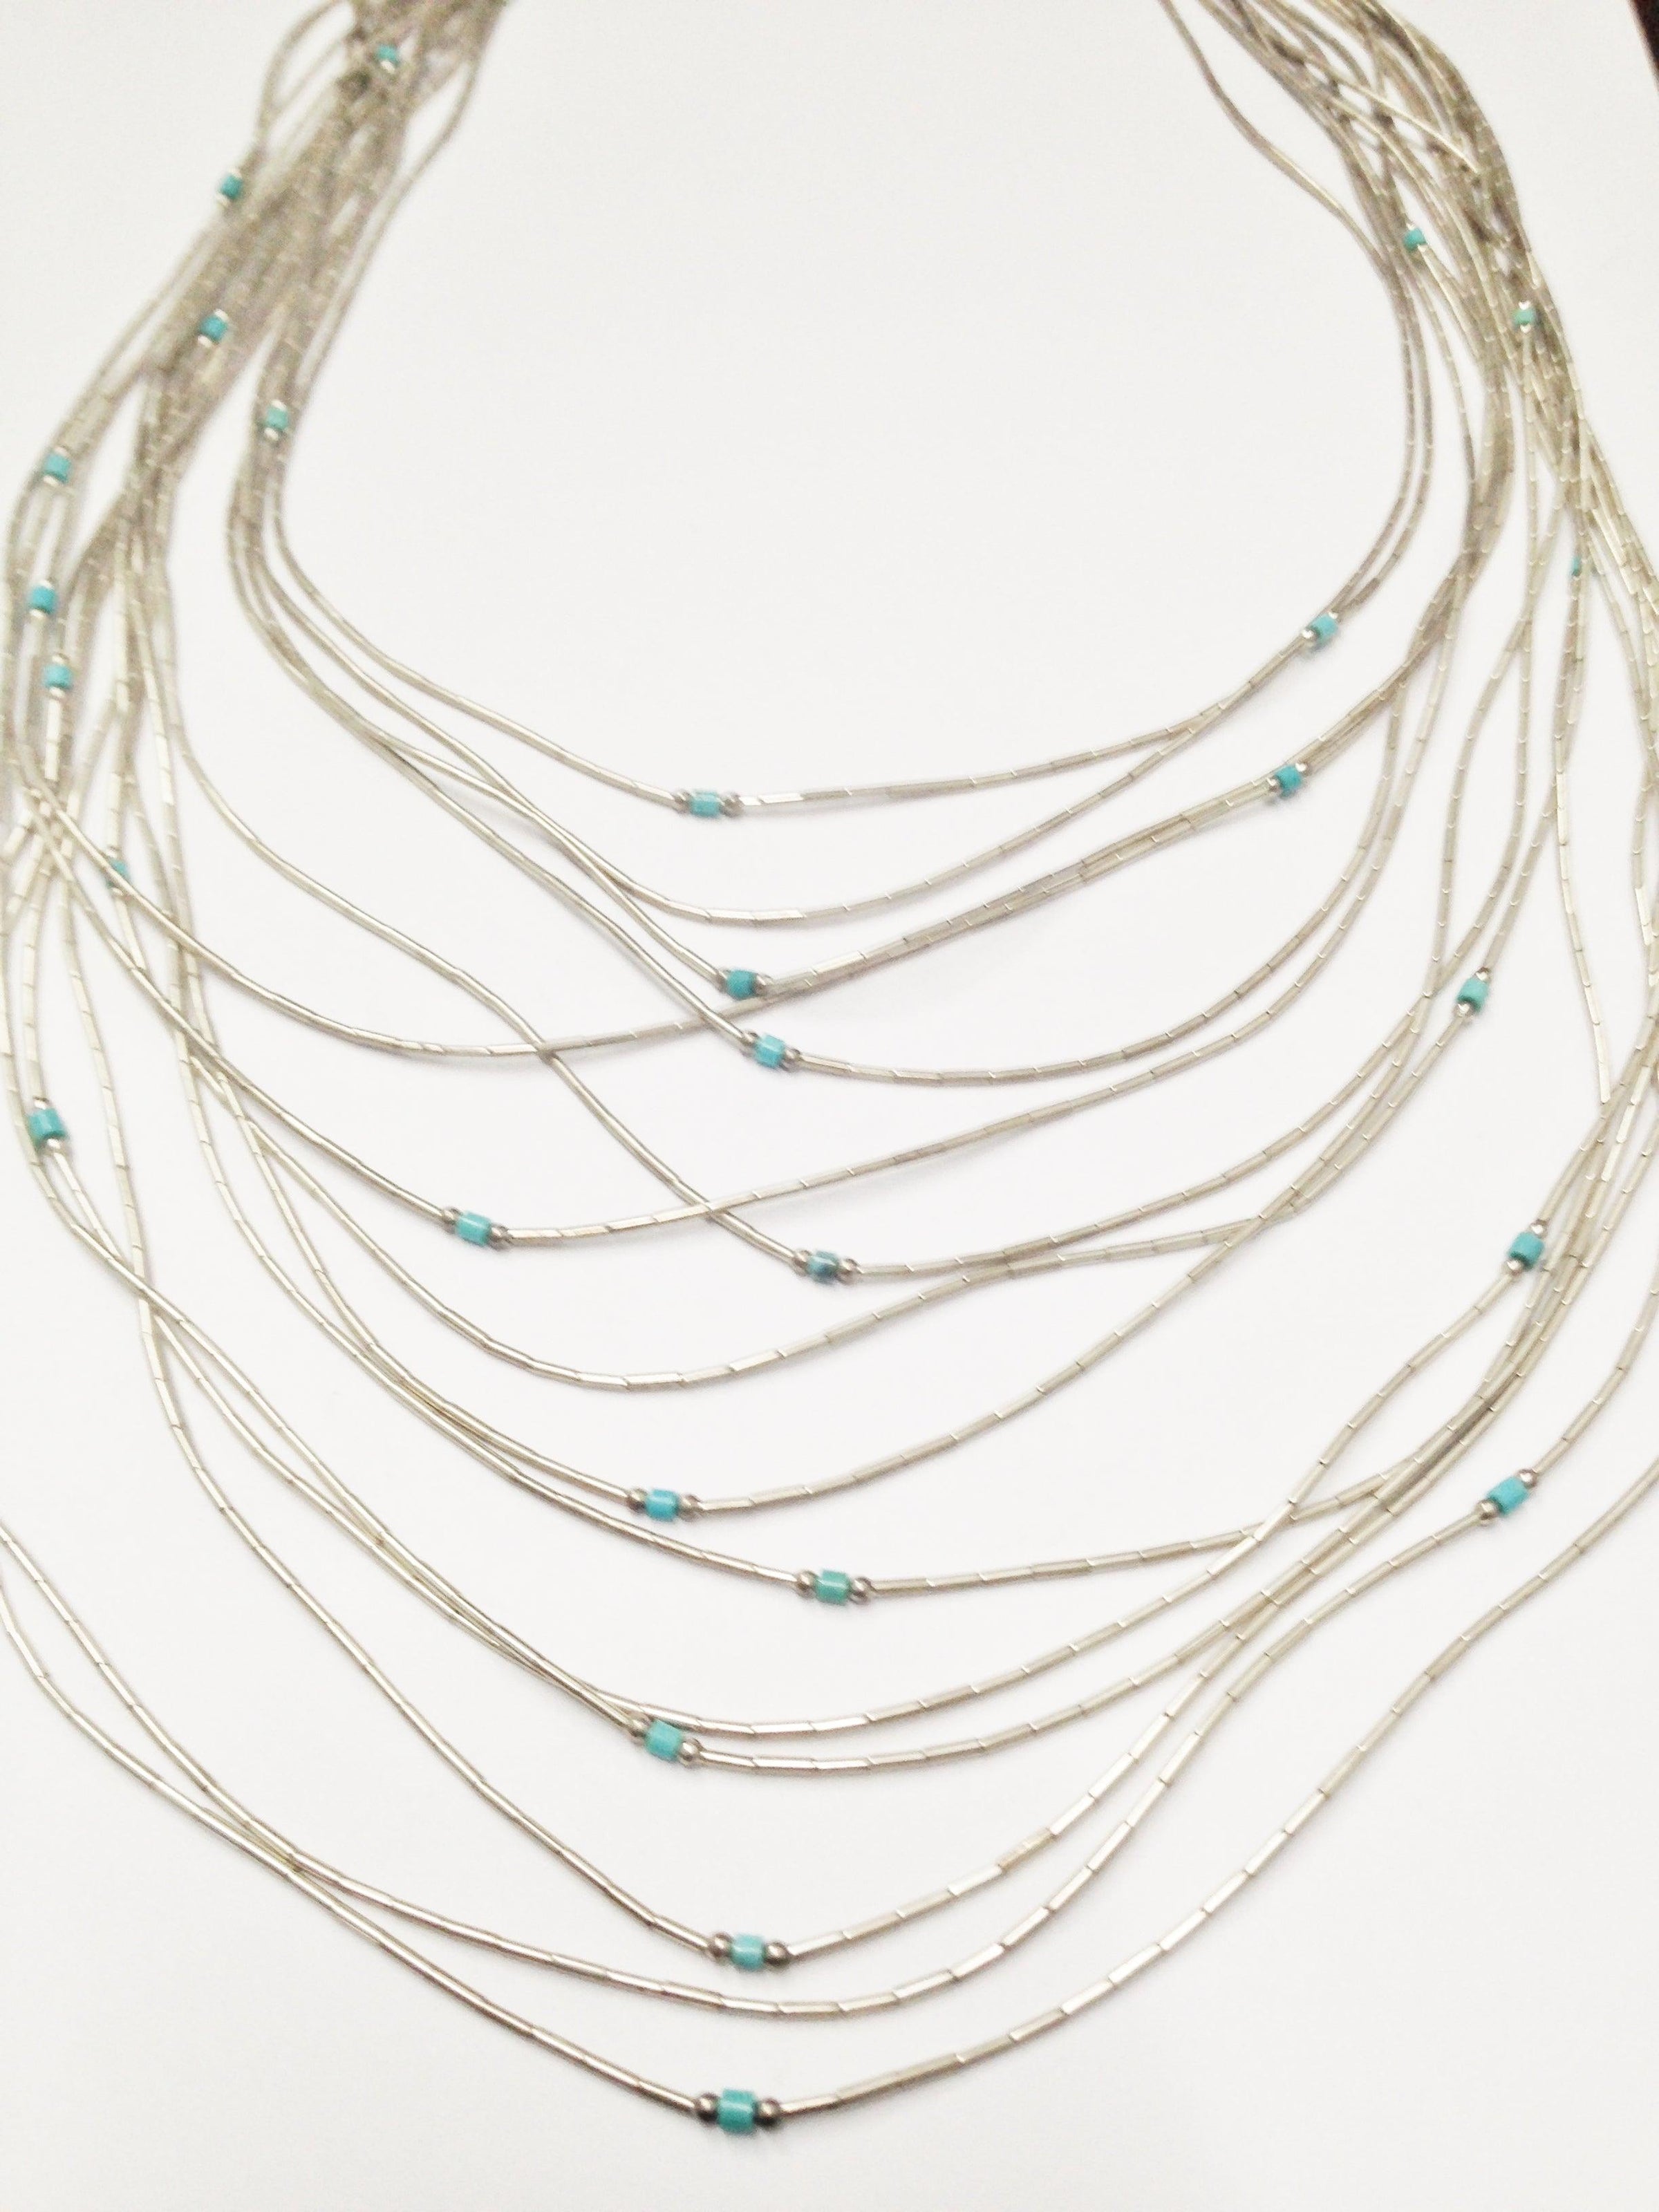 Vintage .925 Sterling Silver Liquid Silver Bead And Turquoise Bead Necklace - Hers and His Treasures